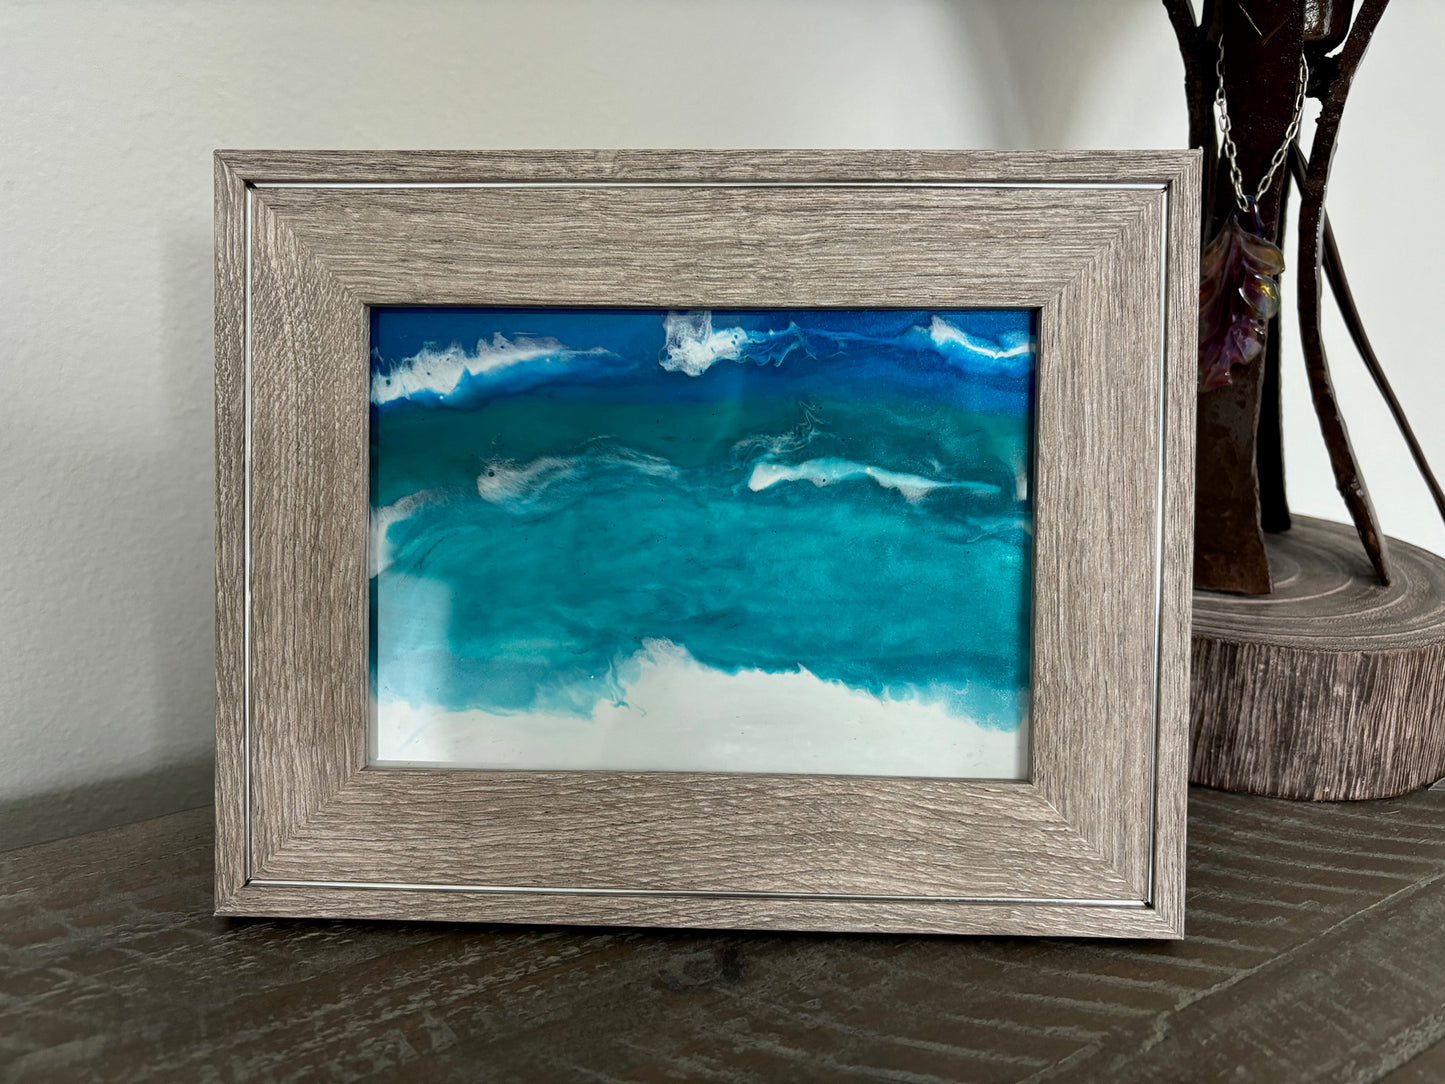 <p>I did a resin ocean scene on the glass of a photo frame. Beautiful turquoise, teal and blue water dance among the white foamy waves and white sand beach. Just like here in Panama City Beach!<Can easily hang or sit./p> <p>The resin is UV Resistant.</p> <p>The frame is a brownish/gray and has a line of silver around the whole frame.</p> <p>Overall size of the frame is about 9.5 x 7.75 inches.&nbsp; The glass is approximately 7 x 5 inches.</p>